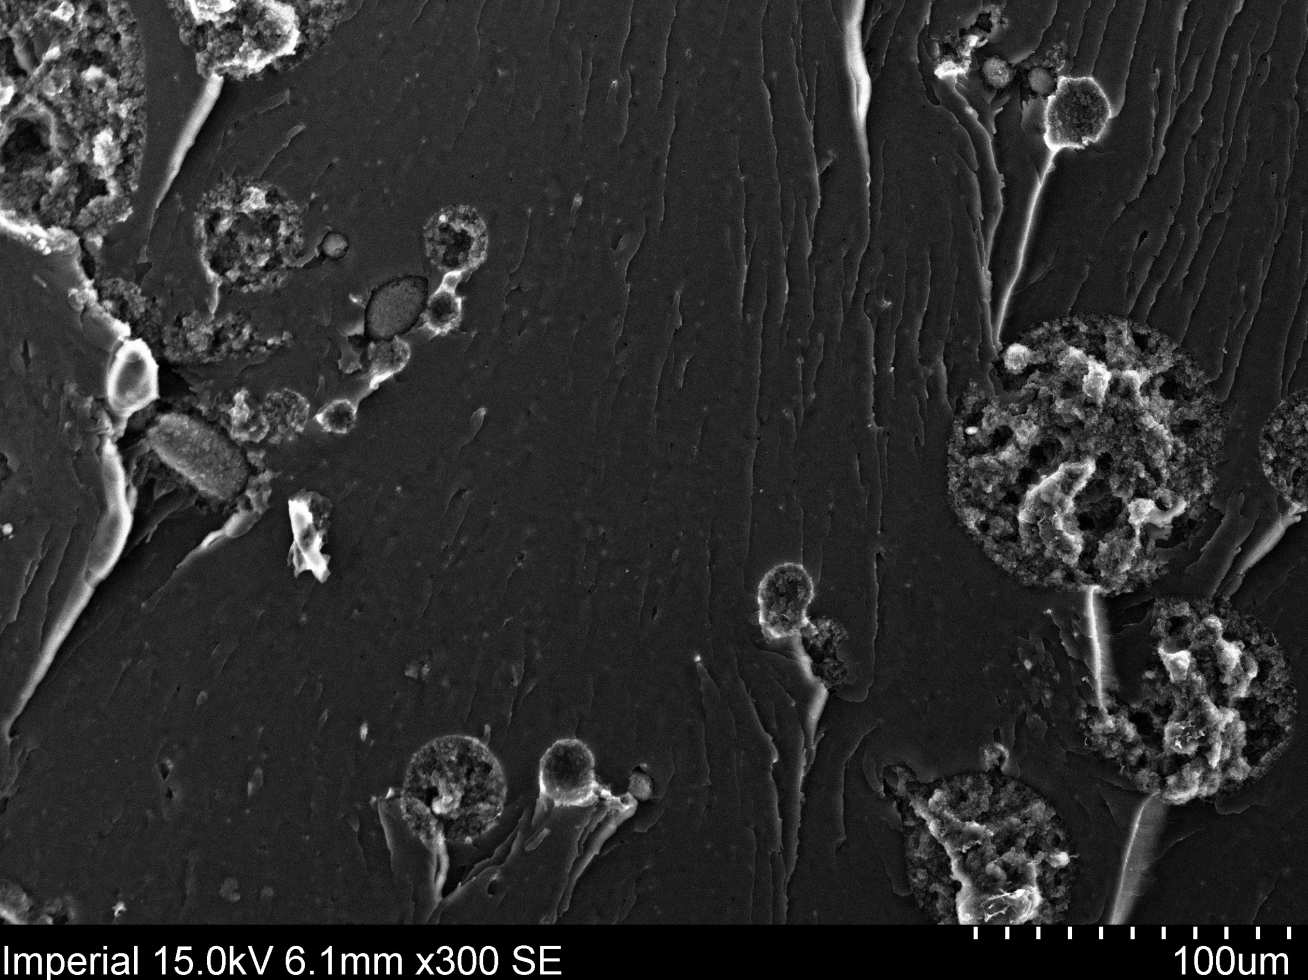 scanning electron microscope (SEM) image of core-shell rubber particles in epoxy